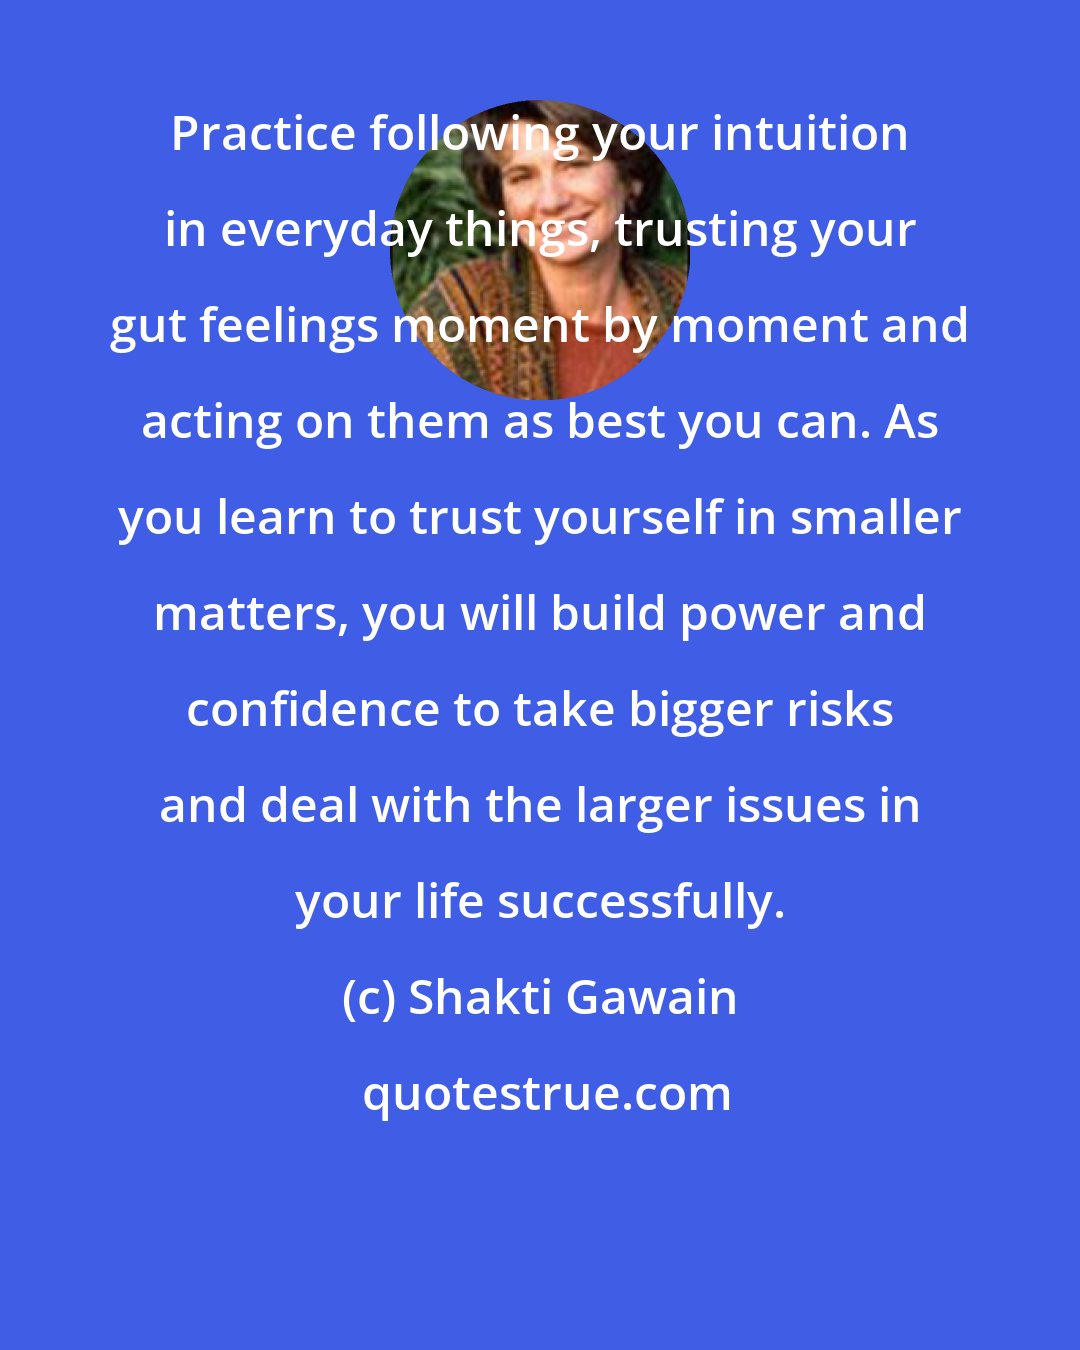 Shakti Gawain: Practice following your intuition in everyday things, trusting your gut feelings moment by moment and acting on them as best you can. As you learn to trust yourself in smaller matters, you will build power and confidence to take bigger risks and deal with the larger issues in your life successfully.